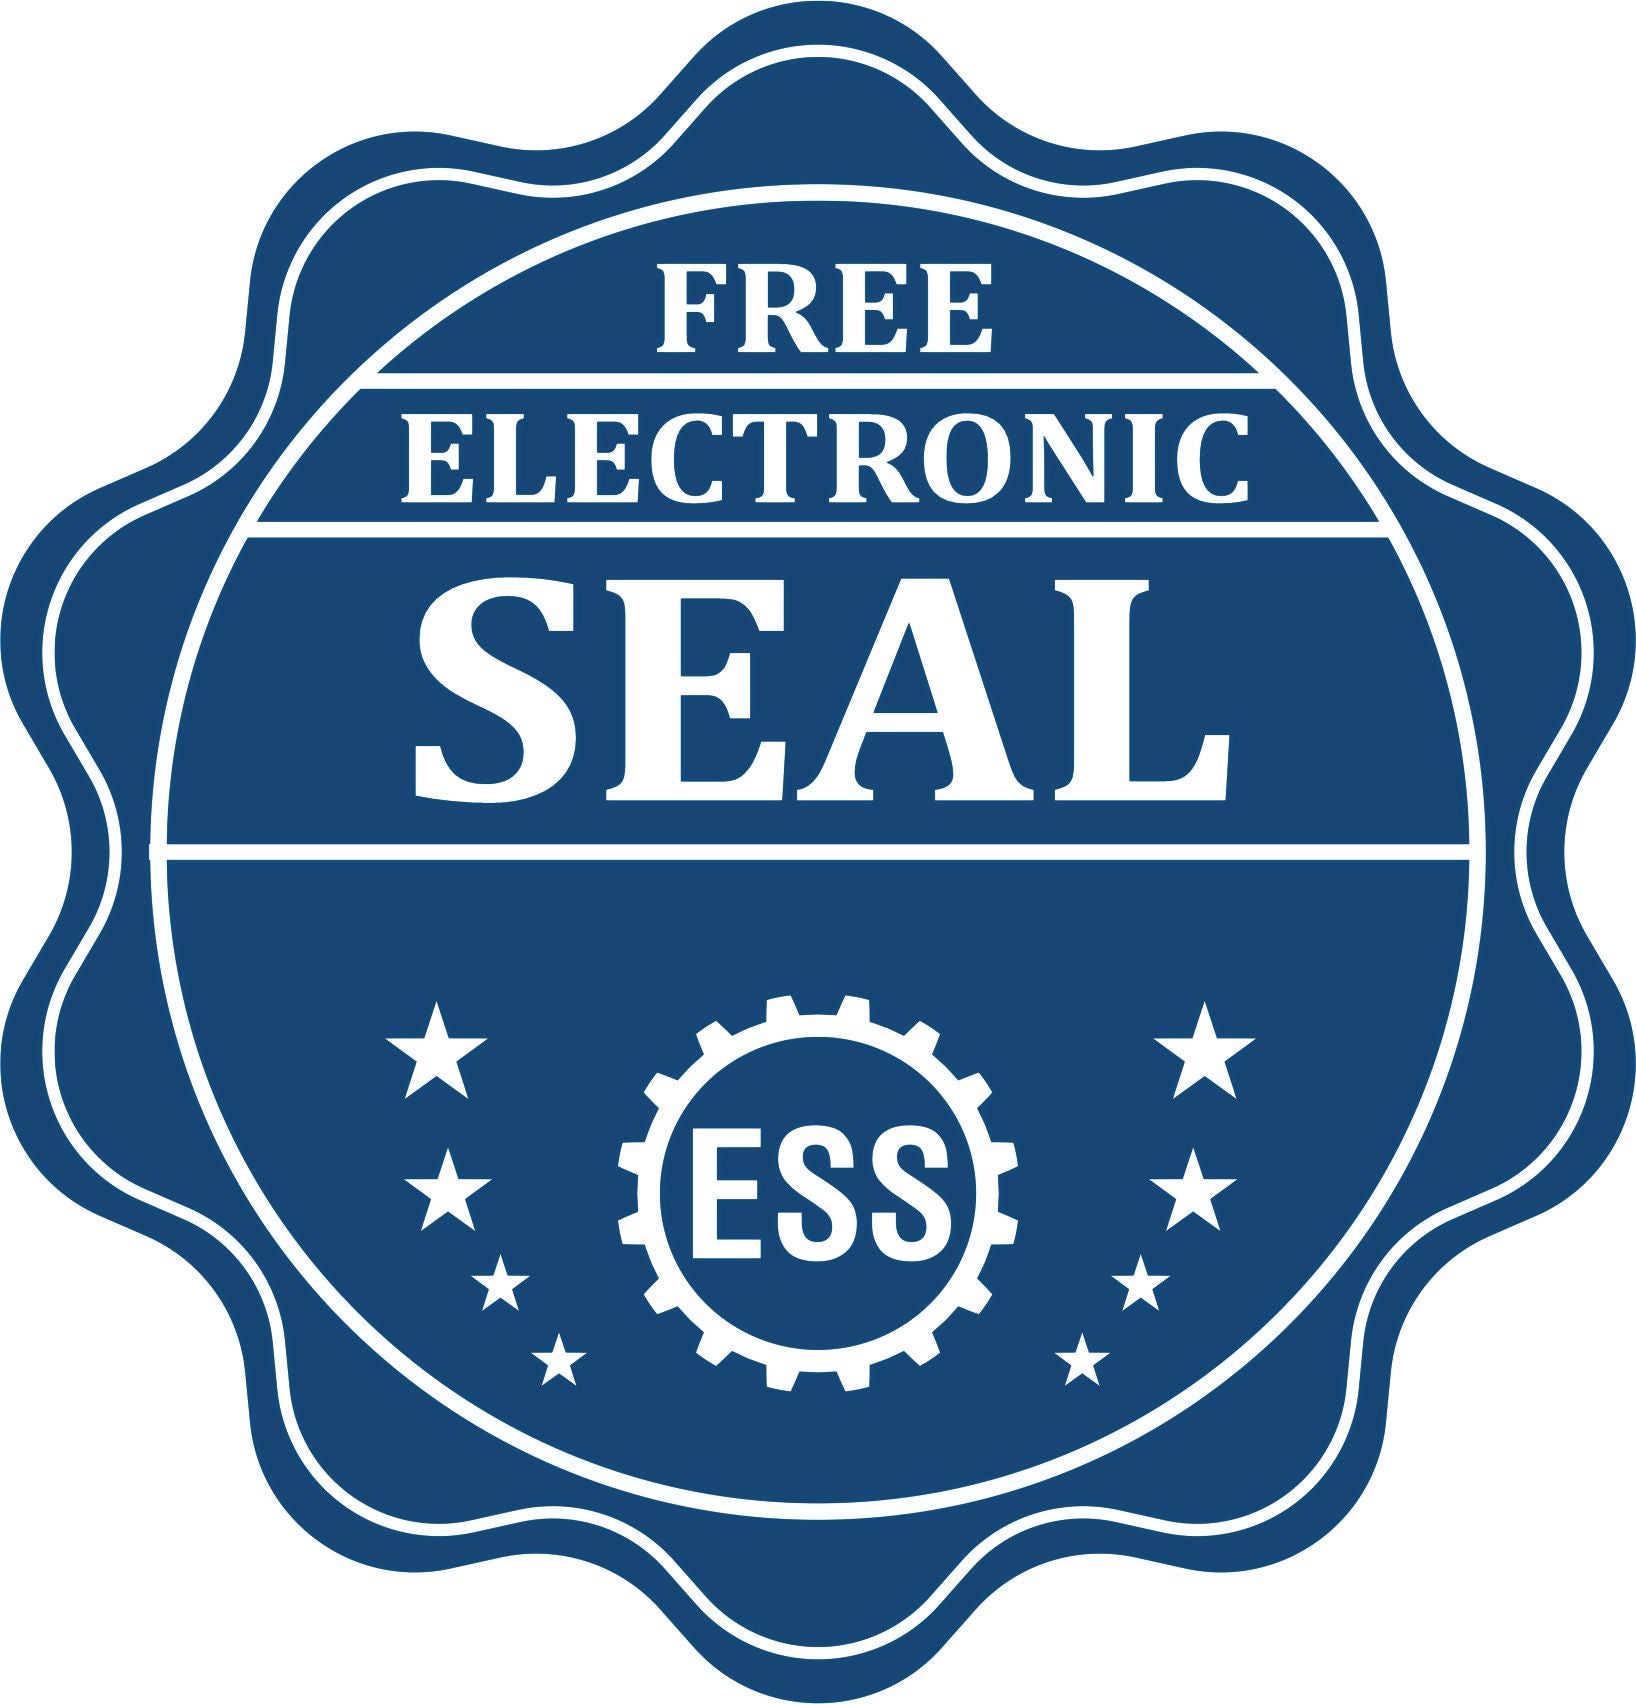 A badge showing a free electronic seal for the Hybrid Maryland Geologist Seal with stars and the ESS gear on the emblem.